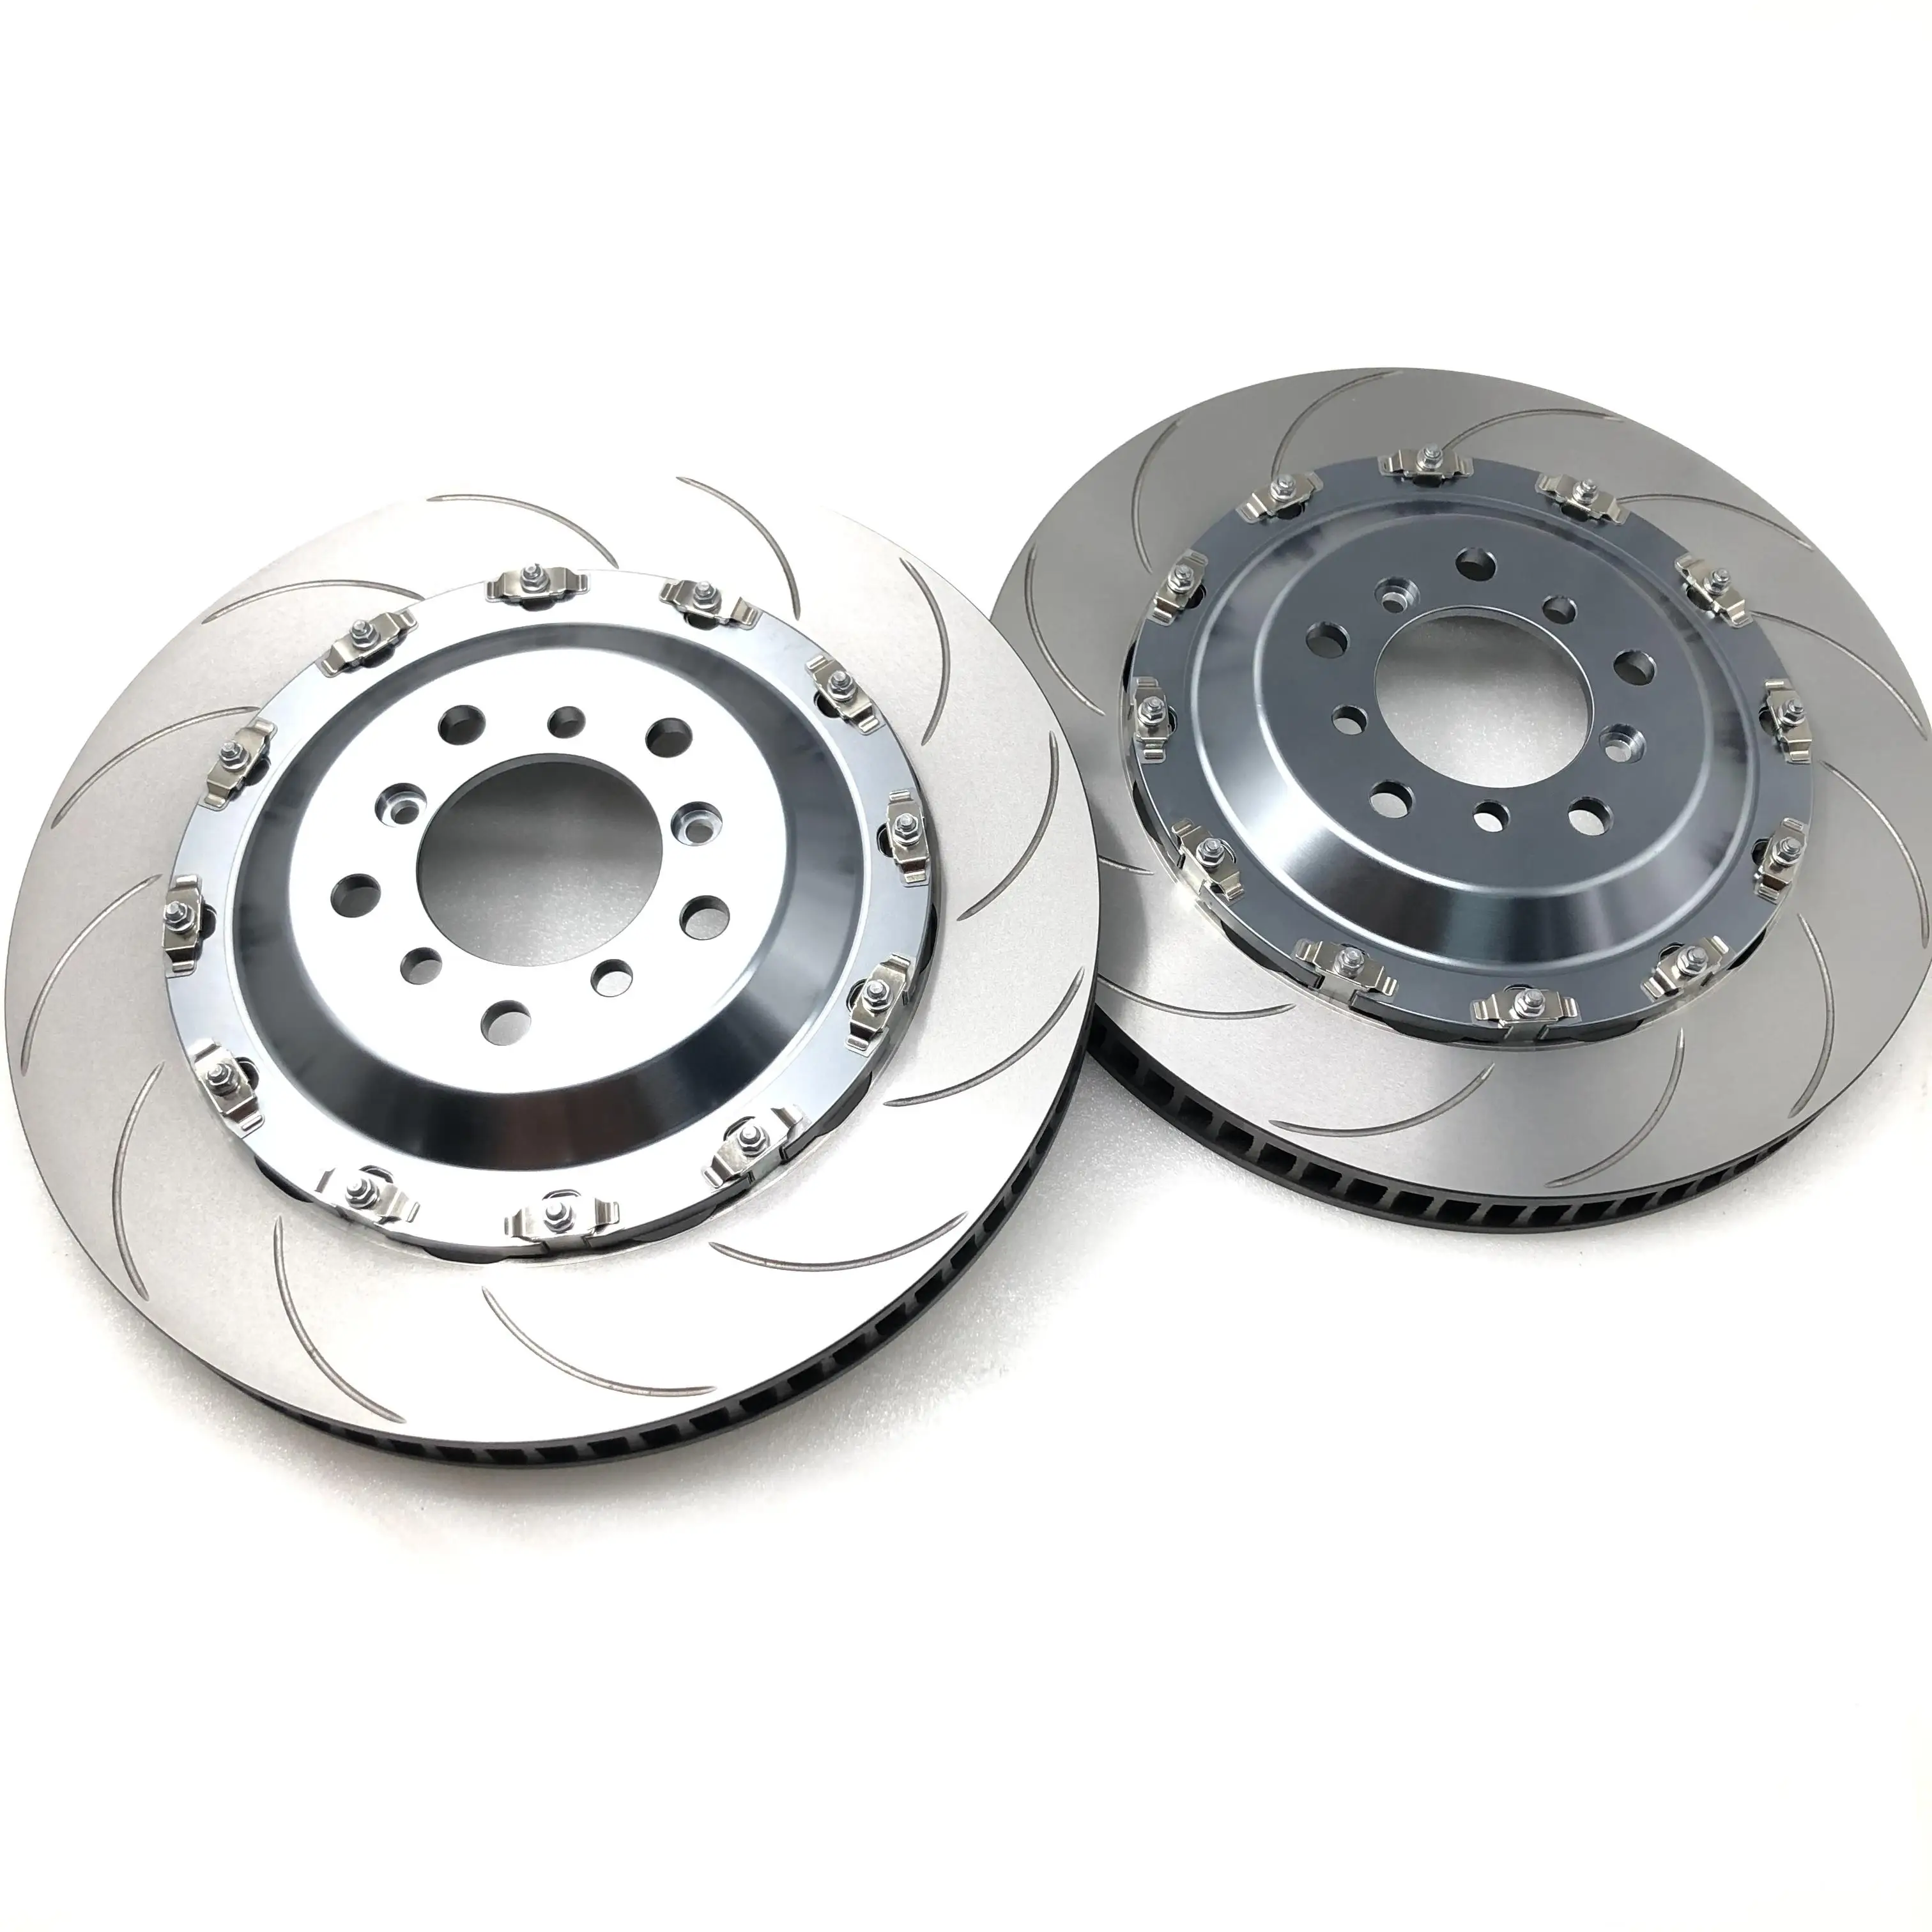 

Jekit auto part 300*28mm ARC groove disc with custom center cap center hole 120mm PCD 6*139*D10.6 for JK7600 brake calipers